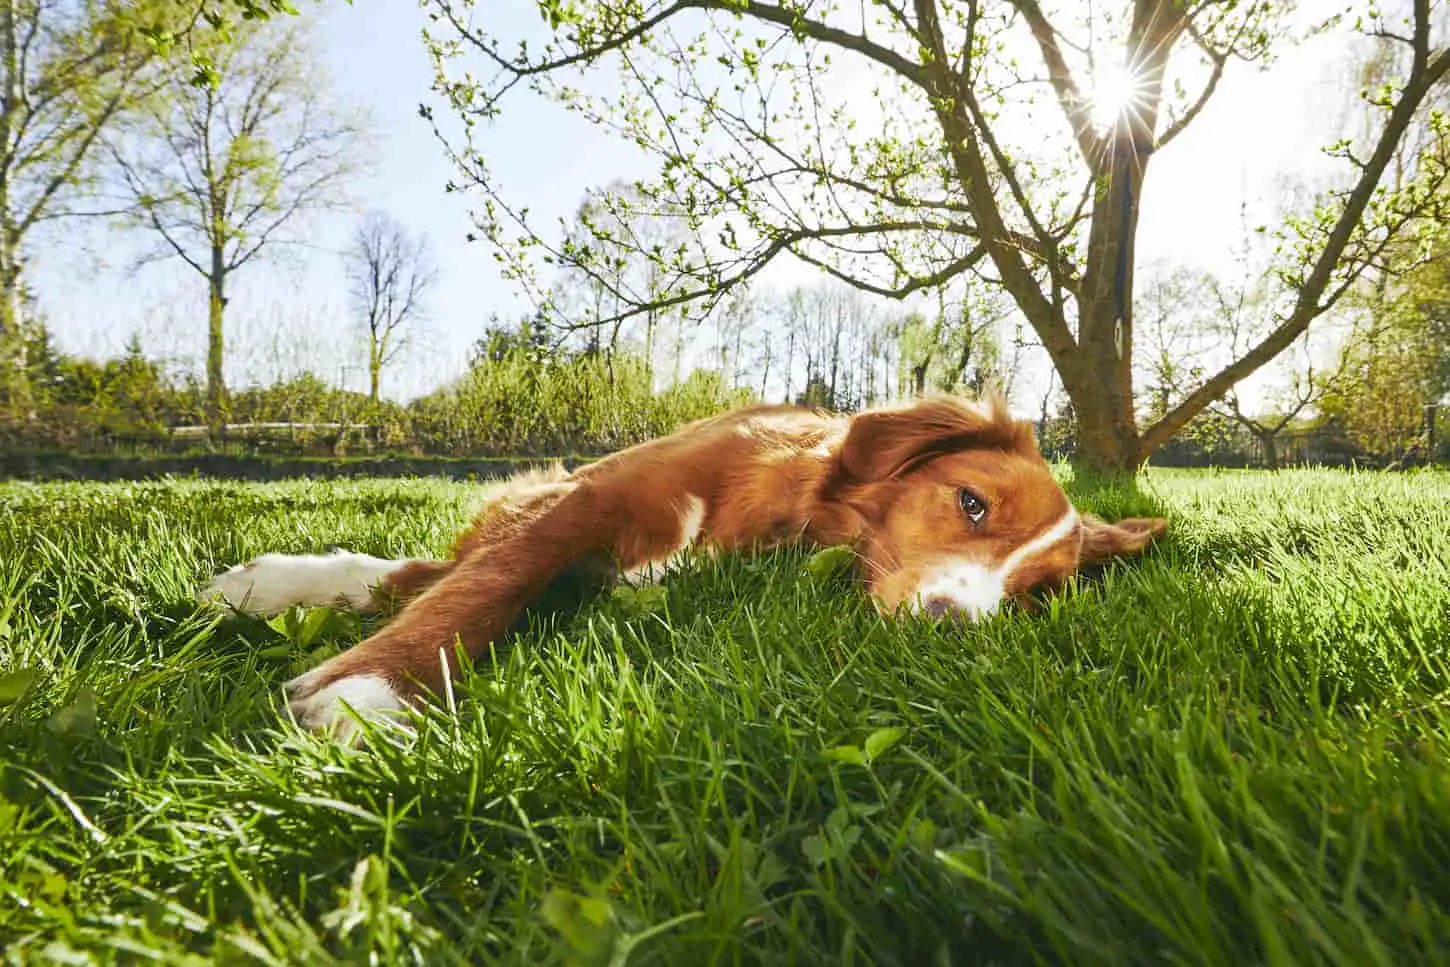 An image of a Cute dog (Nova Scotia Duck Tolling Retriever) resting under a tree in the garden during sunset.